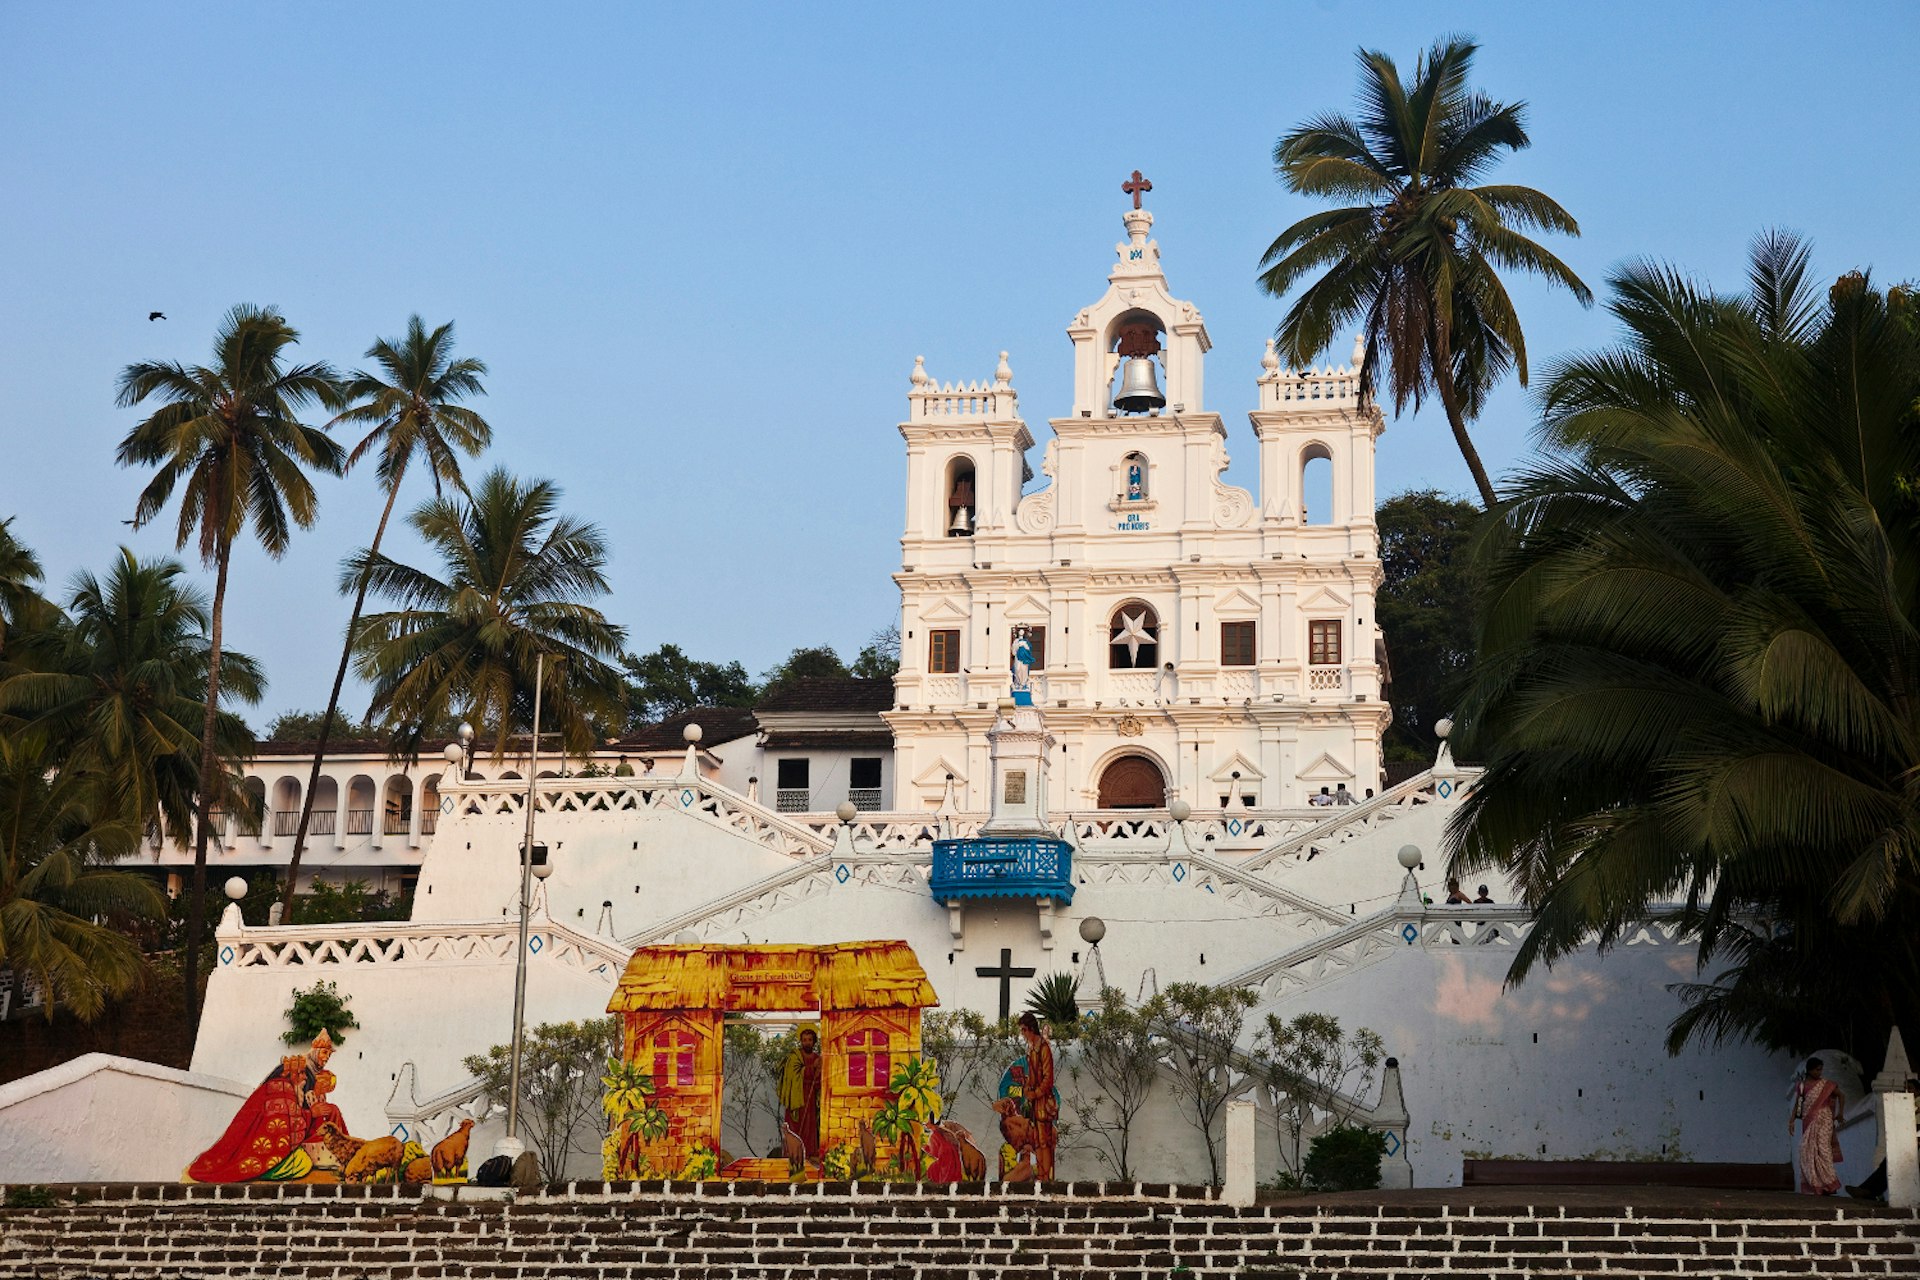 A nativity Scene outside the entrance to the Church of the Immaculate Conception in Old Goa